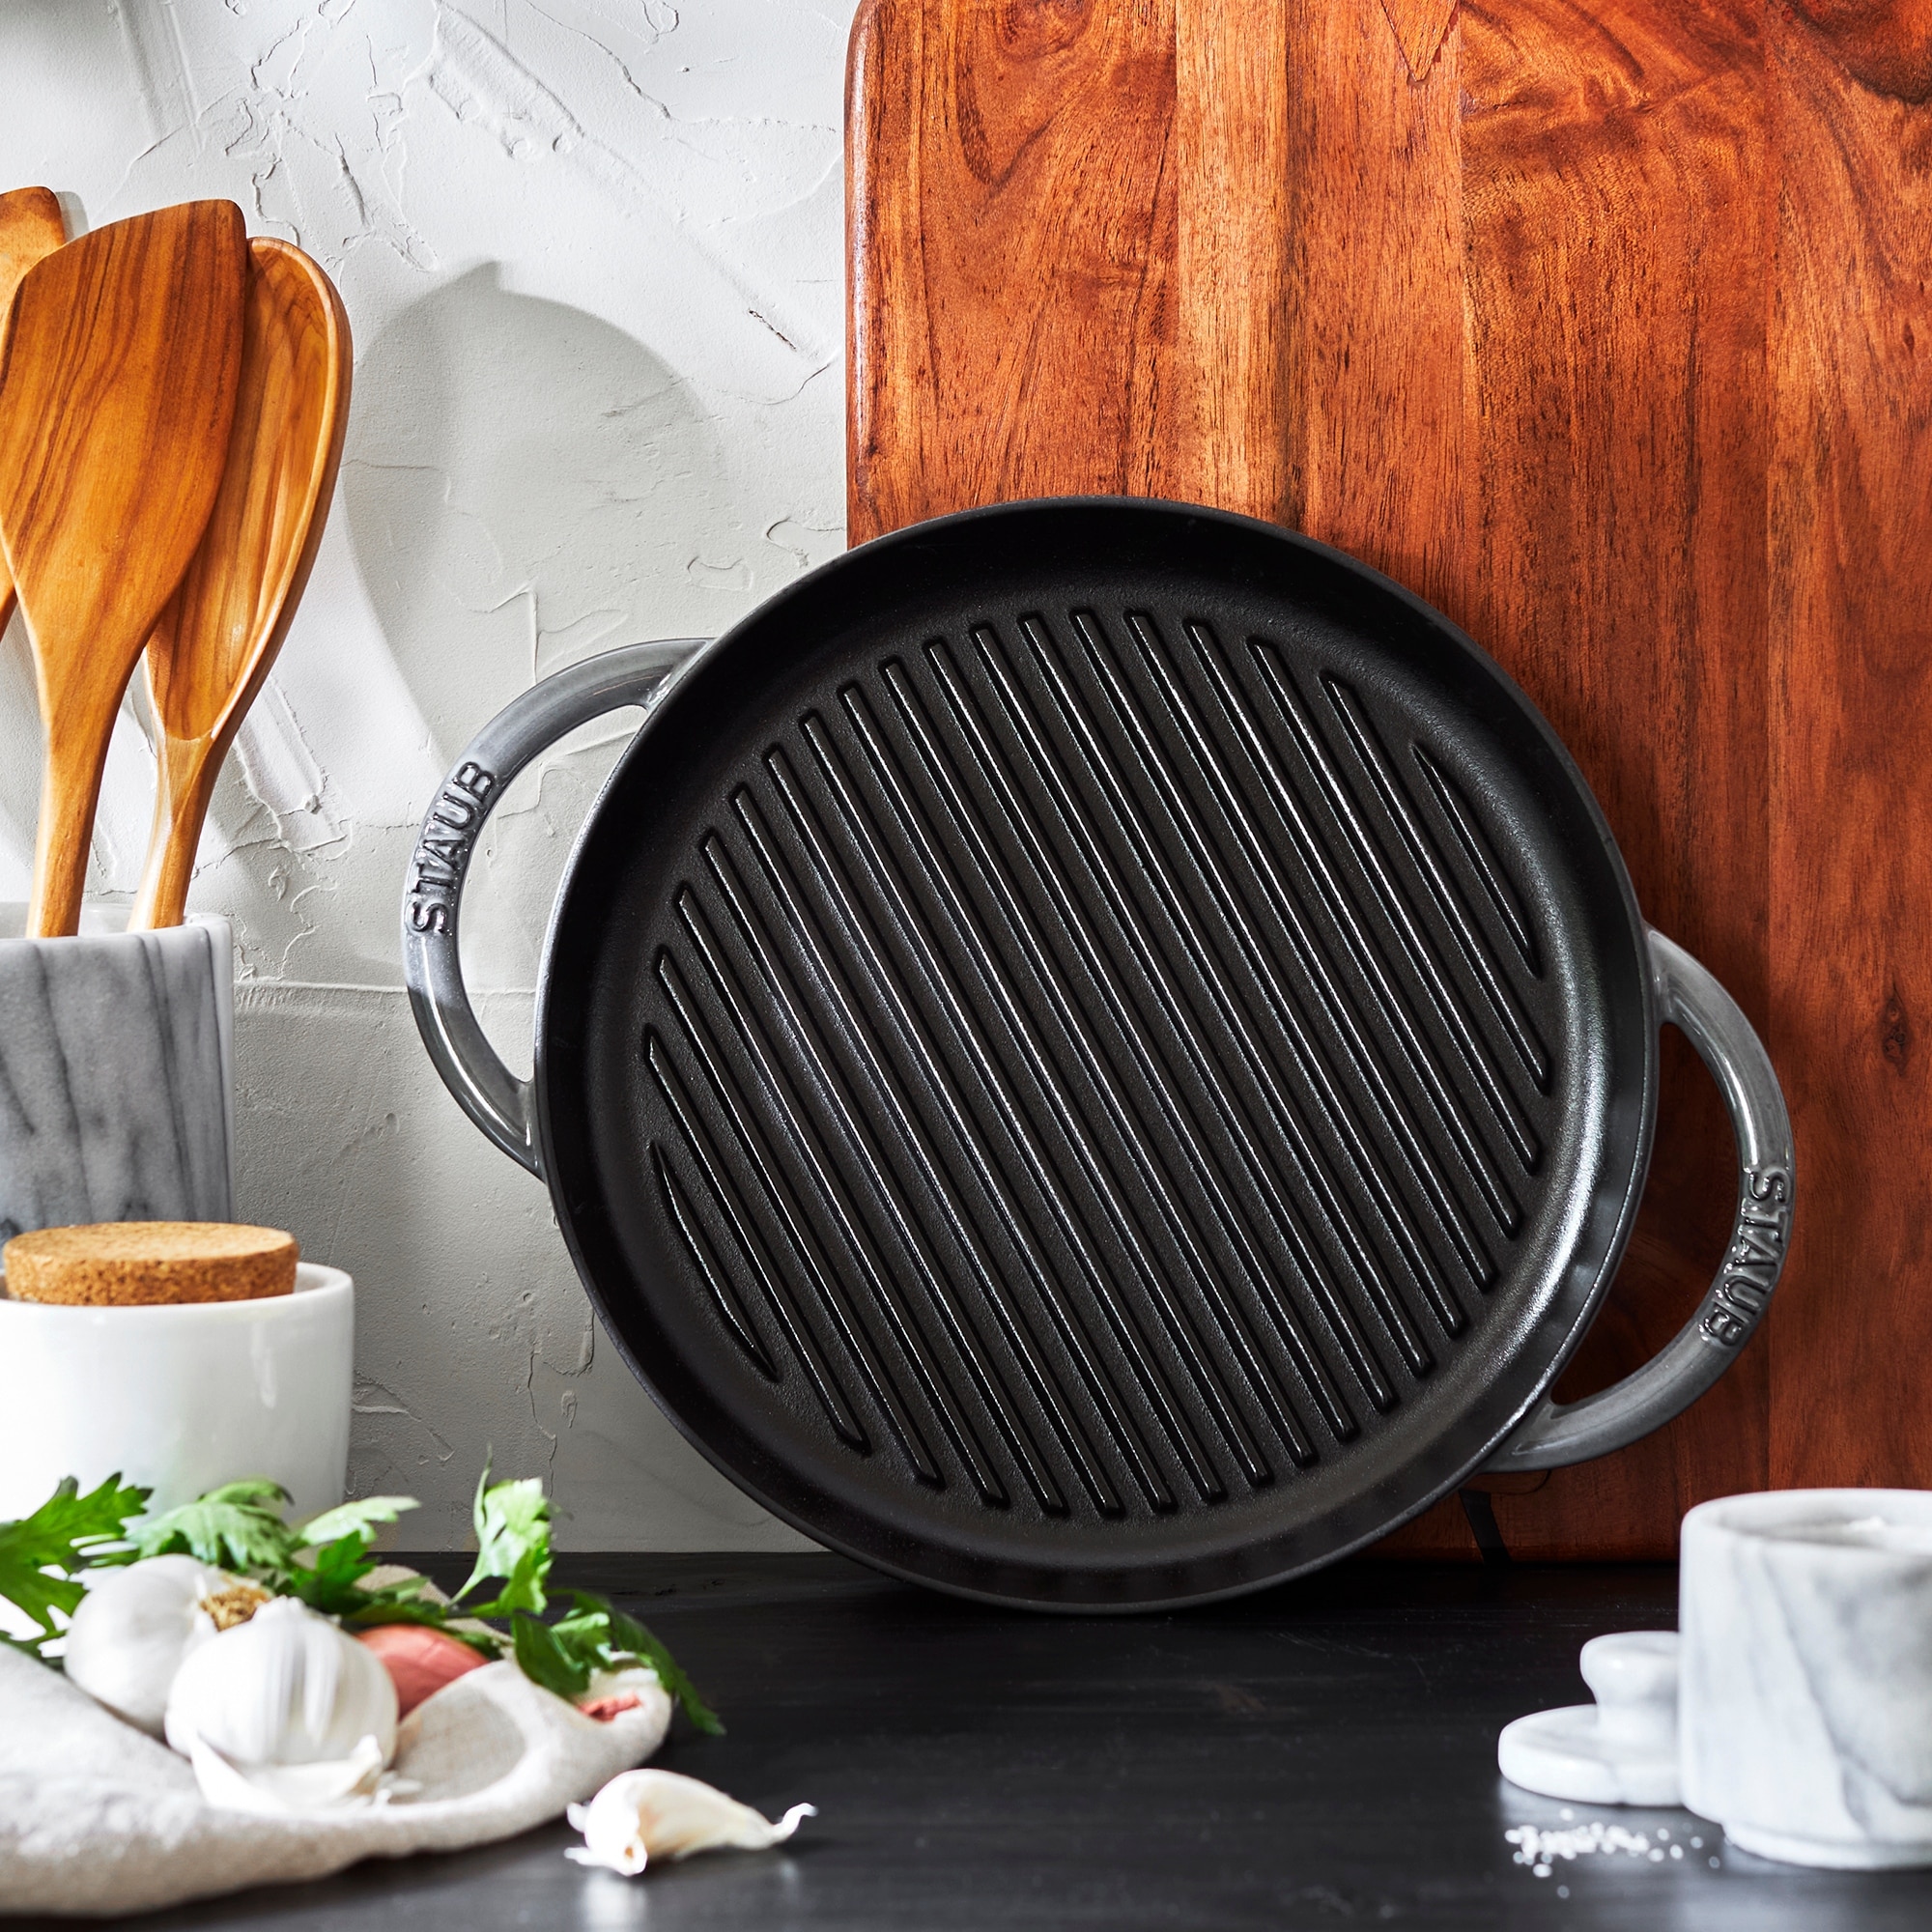 https://ak1.ostkcdn.com/images/products/is/images/direct/45c48b4990cd16f8259ae4b4dd4acd6dcd90b6e0/Staub-Cast-Iron-10-inch-Pure-Grill.jpg